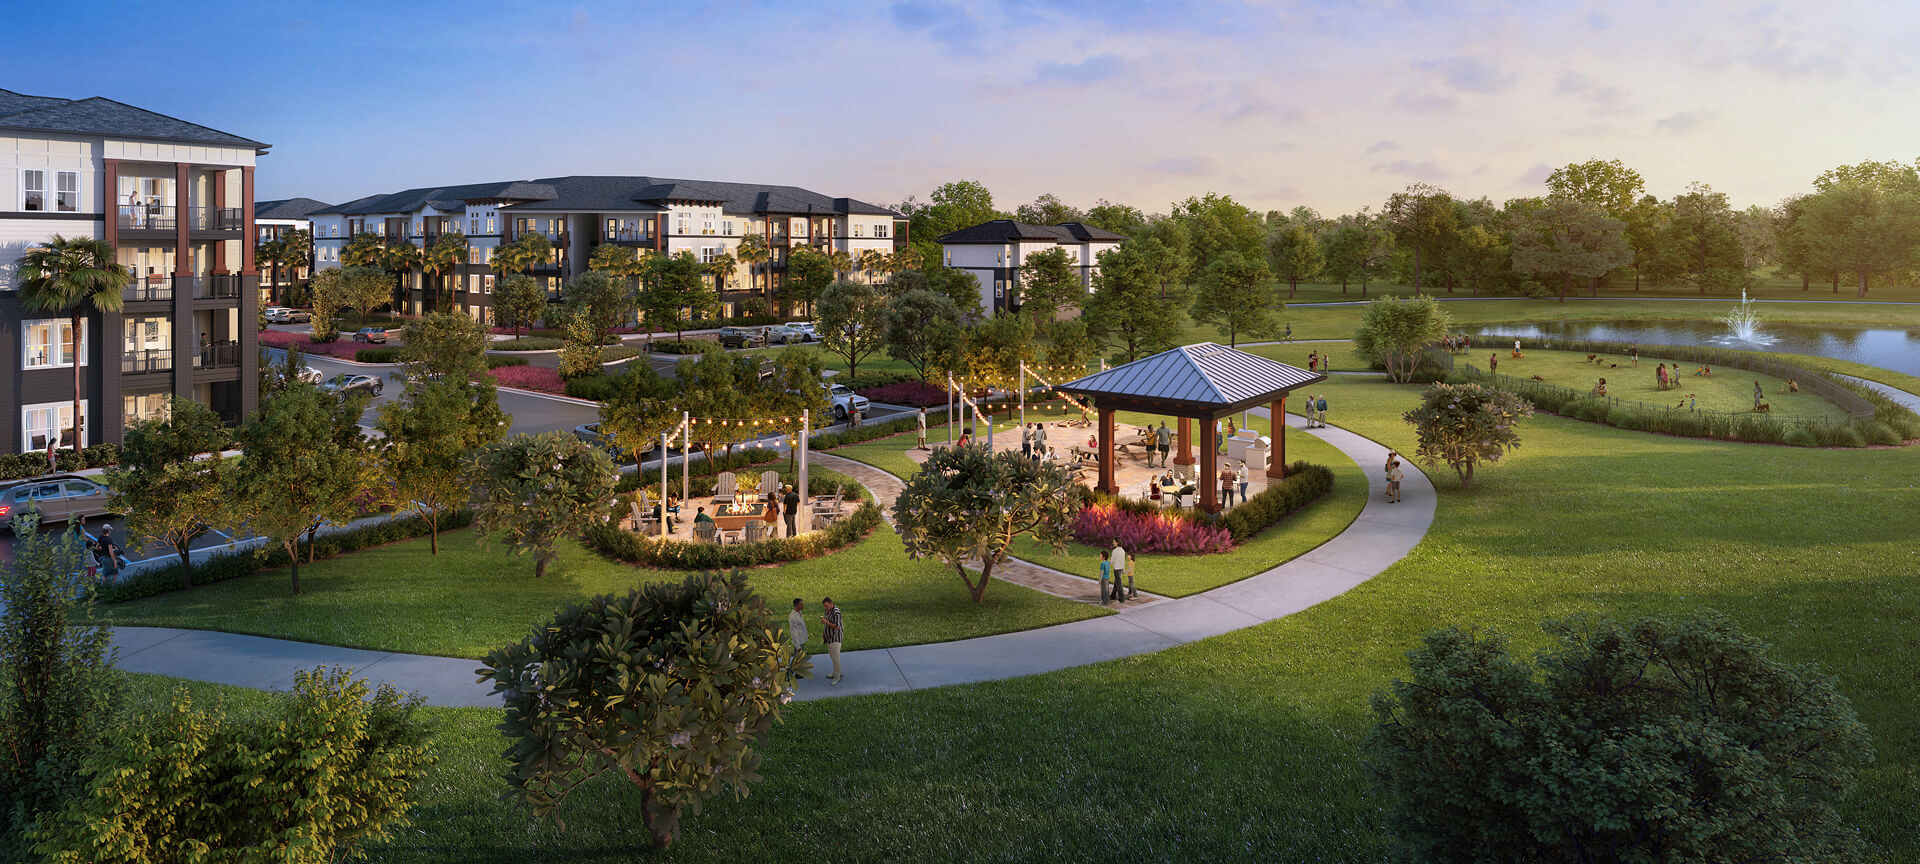 Rendering of The Elliott picnic area with a covered space, walkway, fire pit, fairy lights, and people spending time around the space. In the background you can see The Elliott buildings and a pond with a fountain.